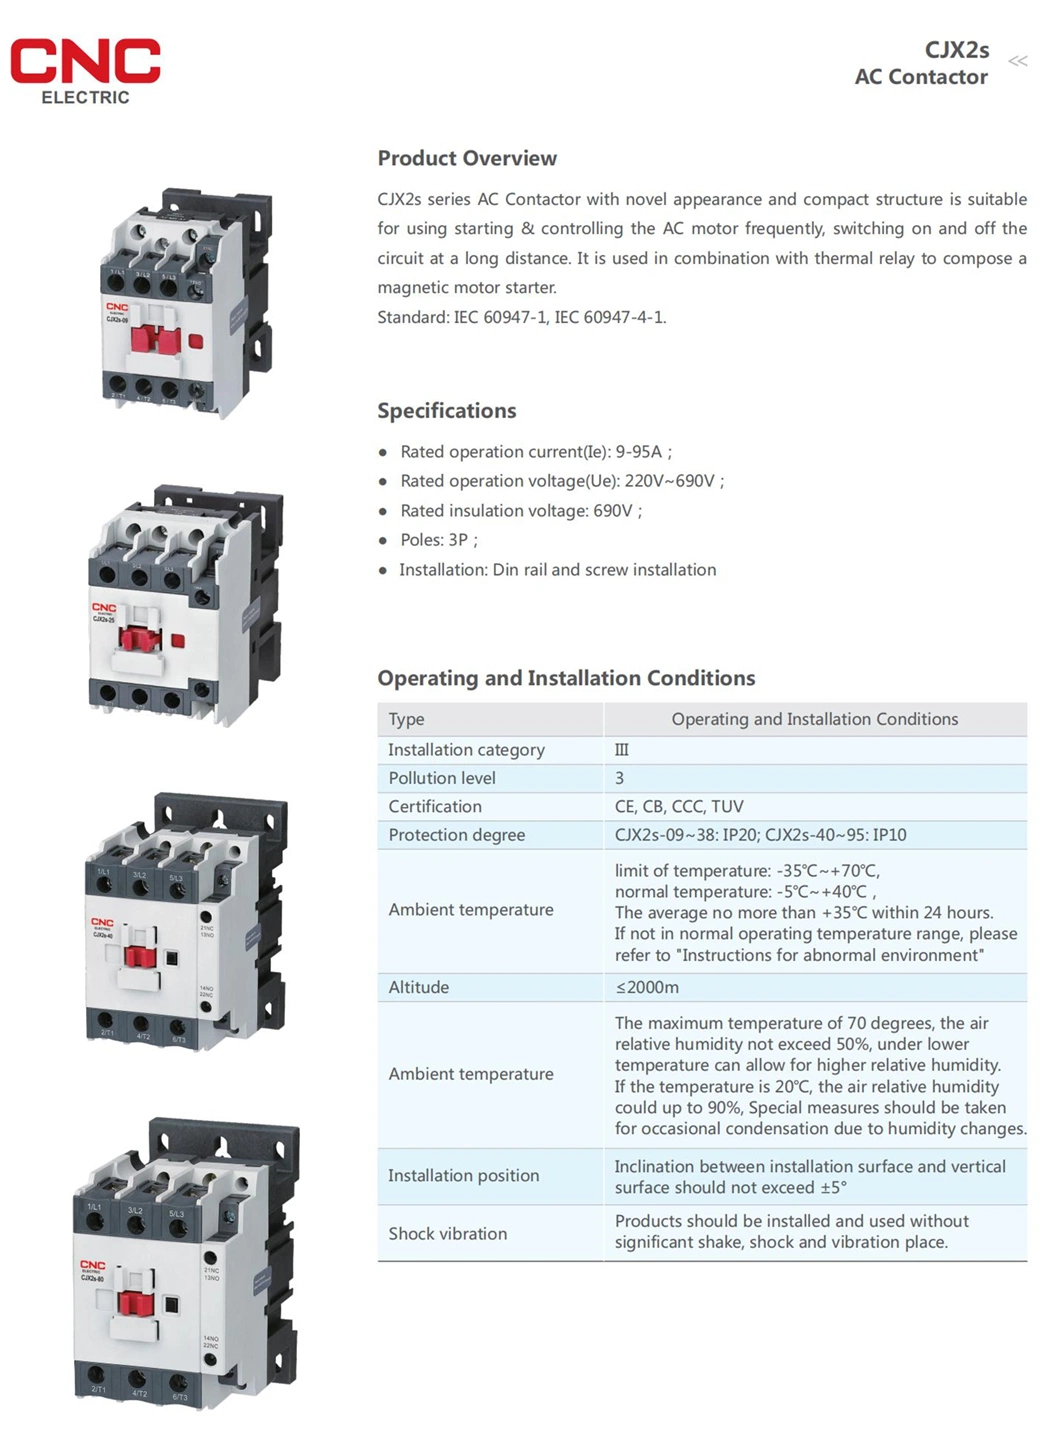 3 Telemecanique Contactores AC High Quality Contactor with Good Price